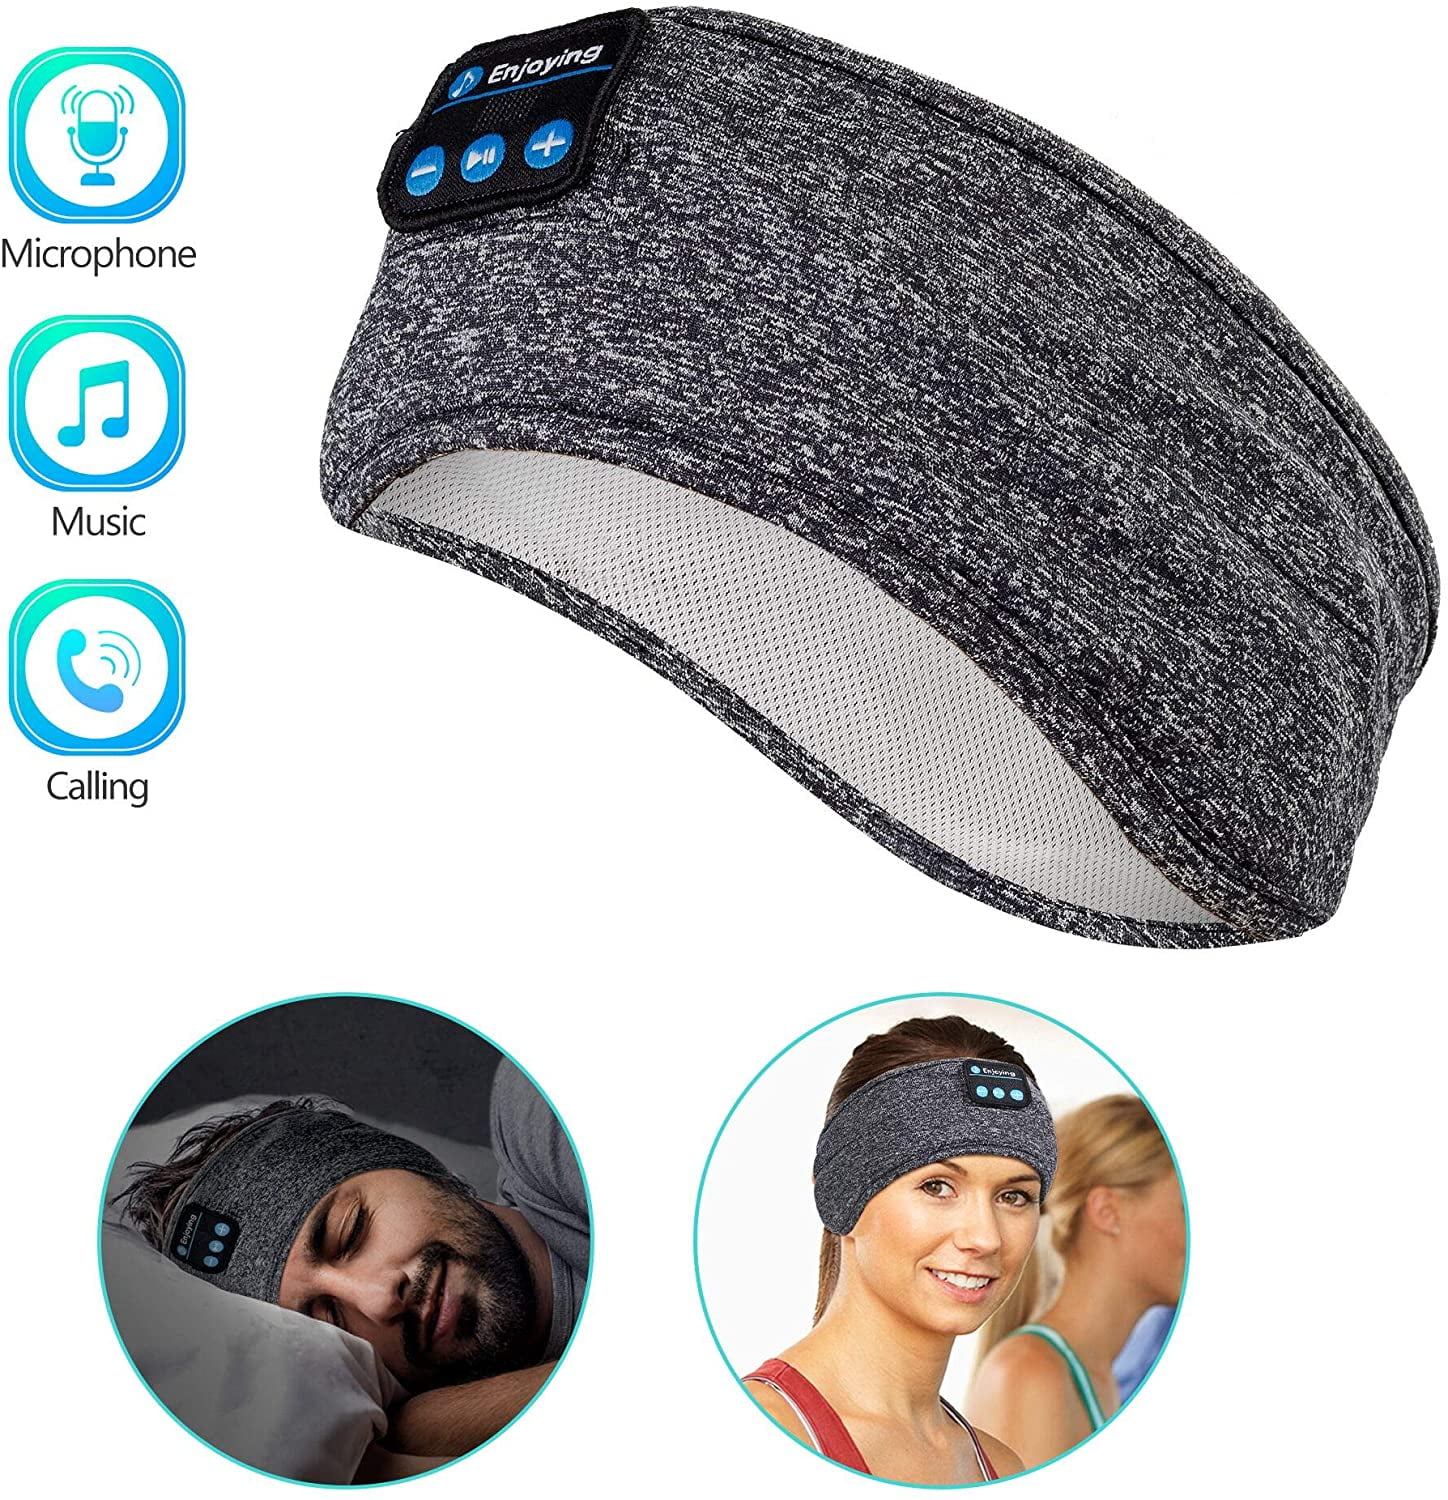 Washable Sleeping Headphones Wireless Headband with Built-in HD Stereo Speakers Perfect for Sports,Workout Sleep Headphones Bluetooth Yoga,Insomnia Running